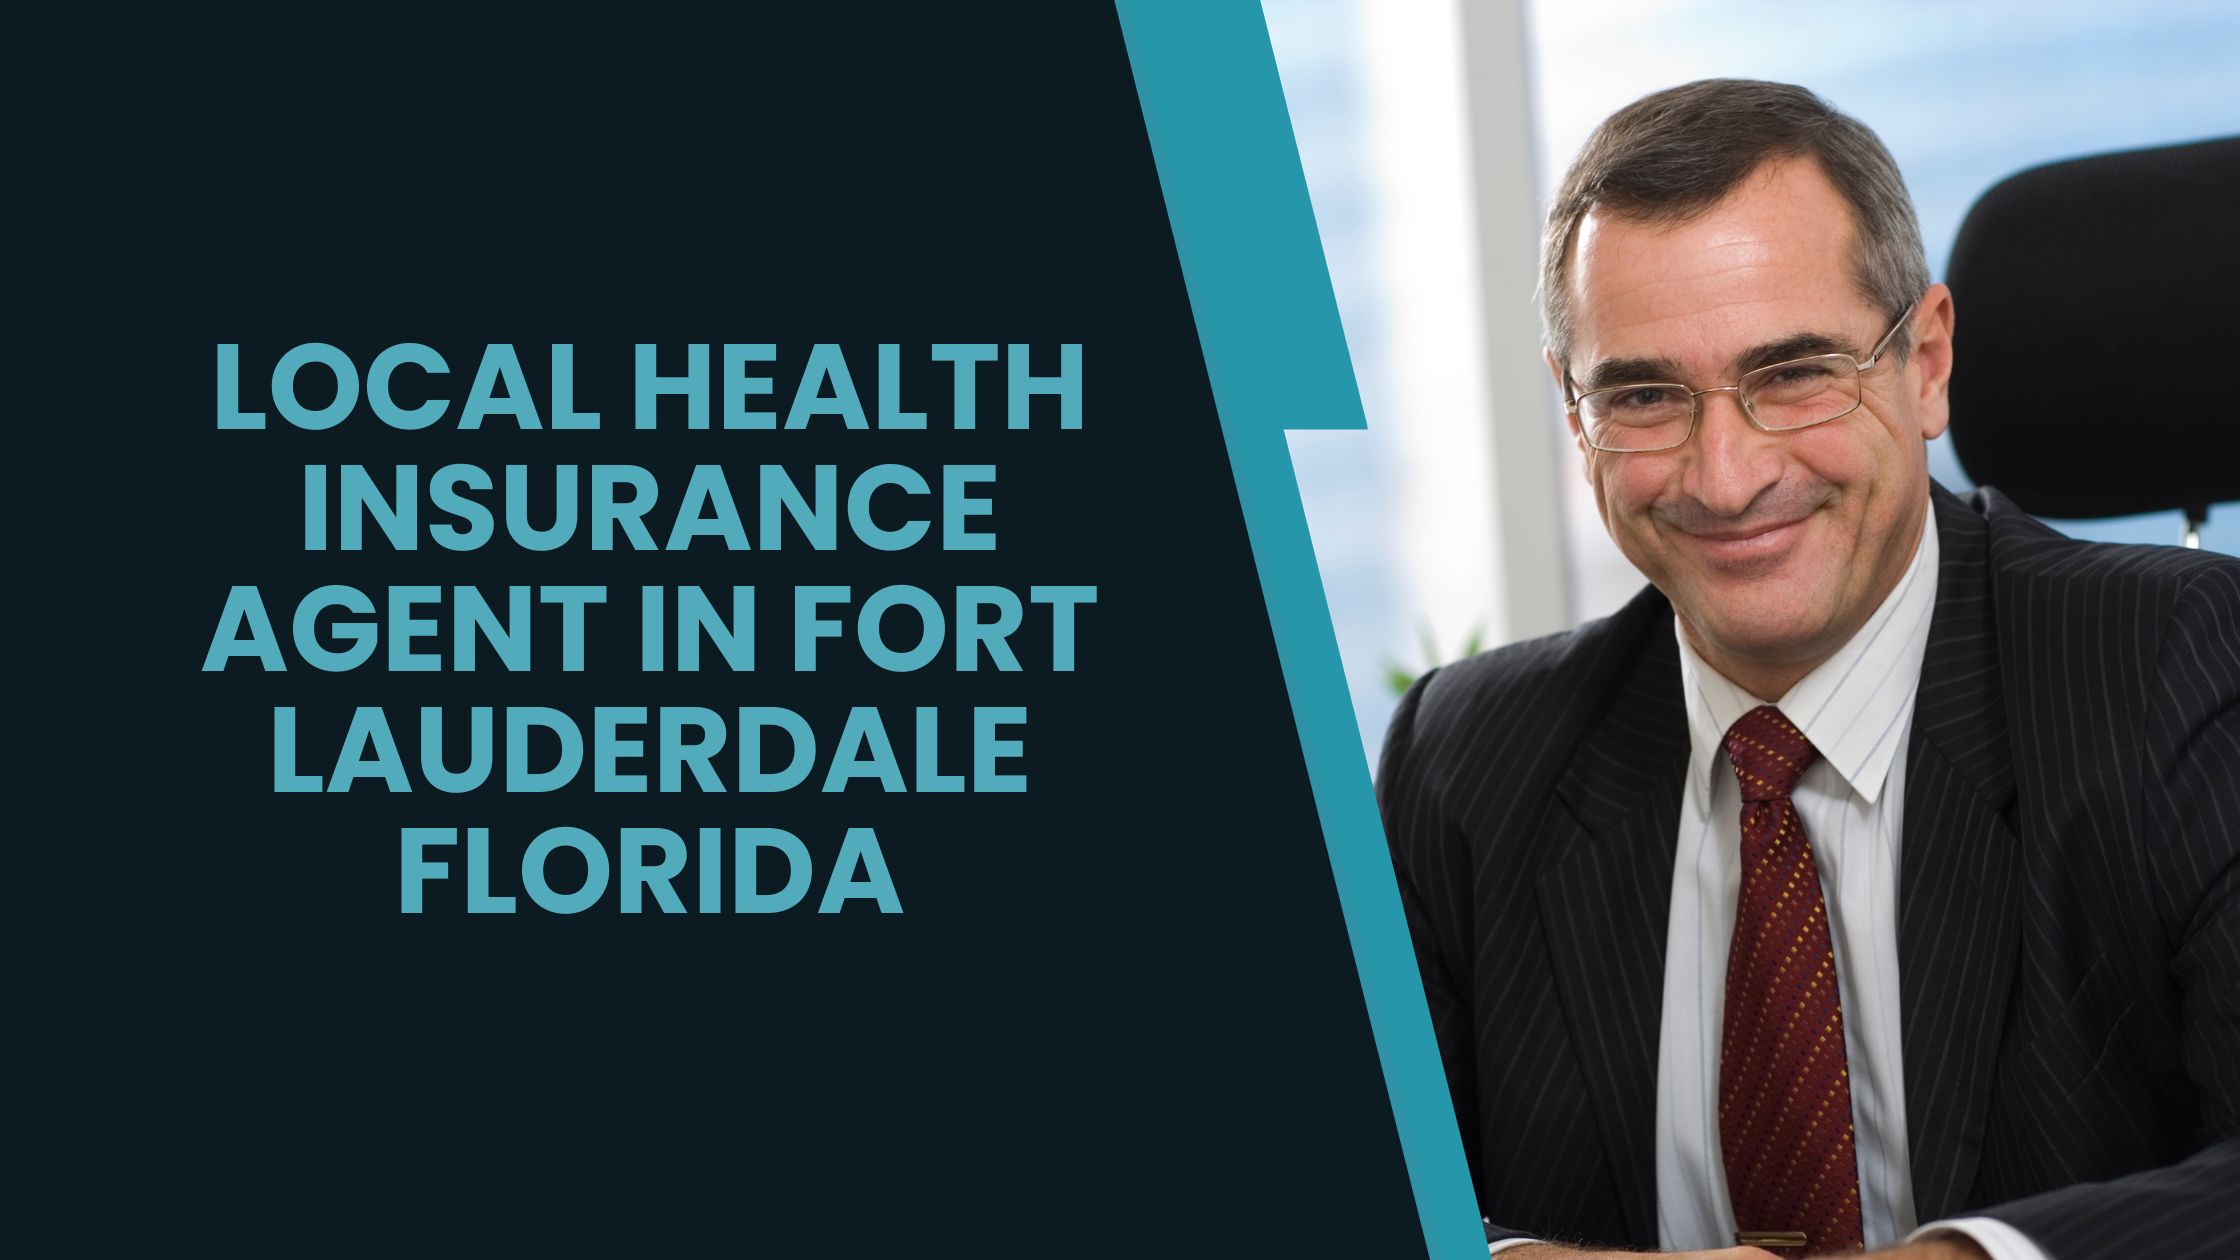 Local Health Insurance Agent in Fort Lauderdale Florida